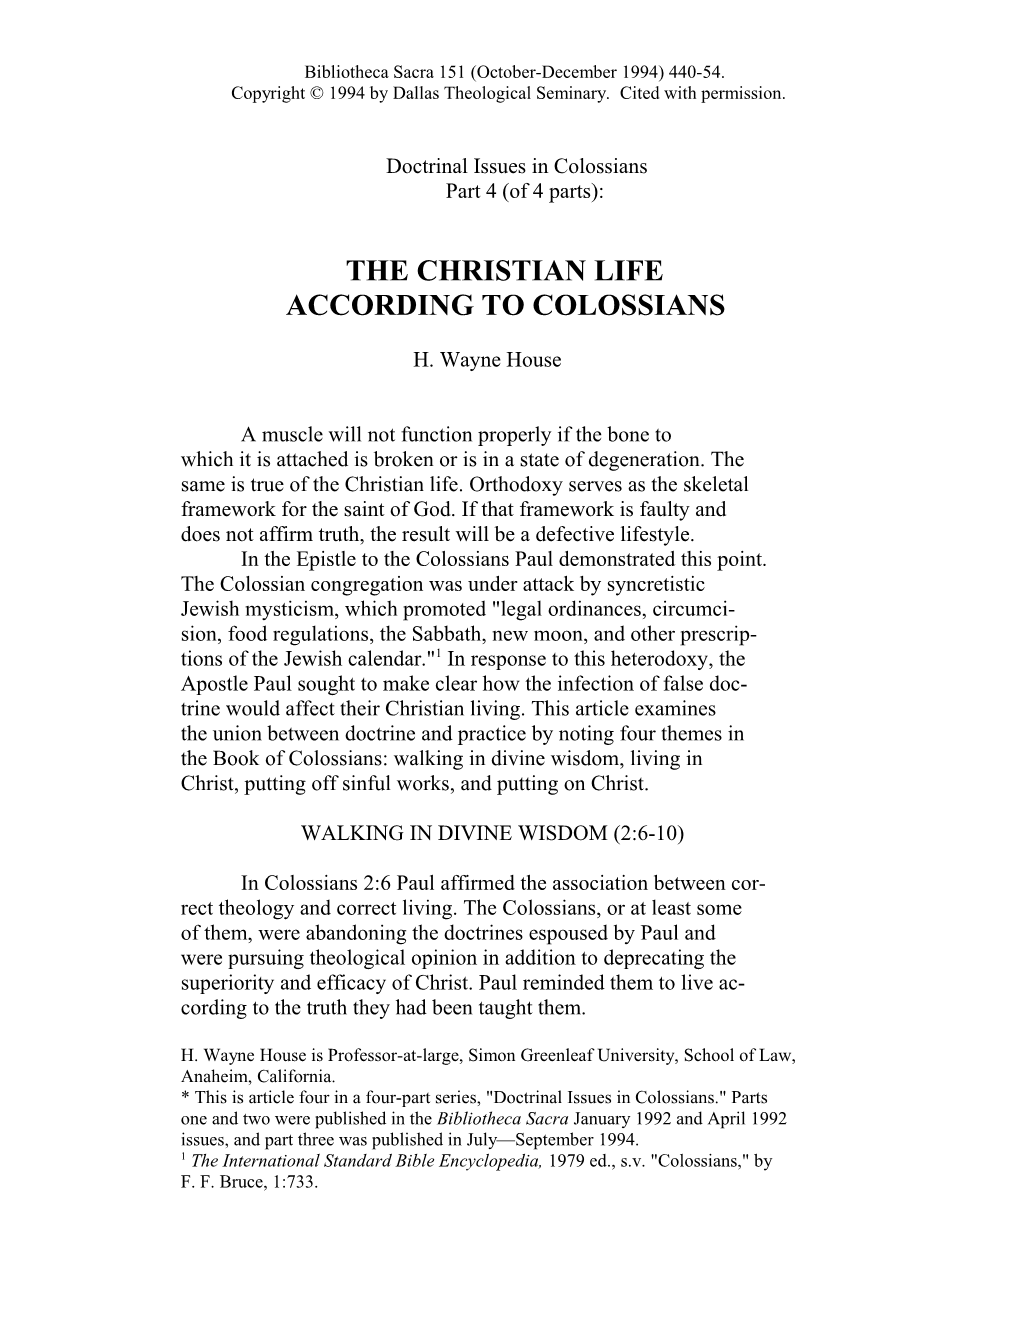 The Christian Life According to Colossians